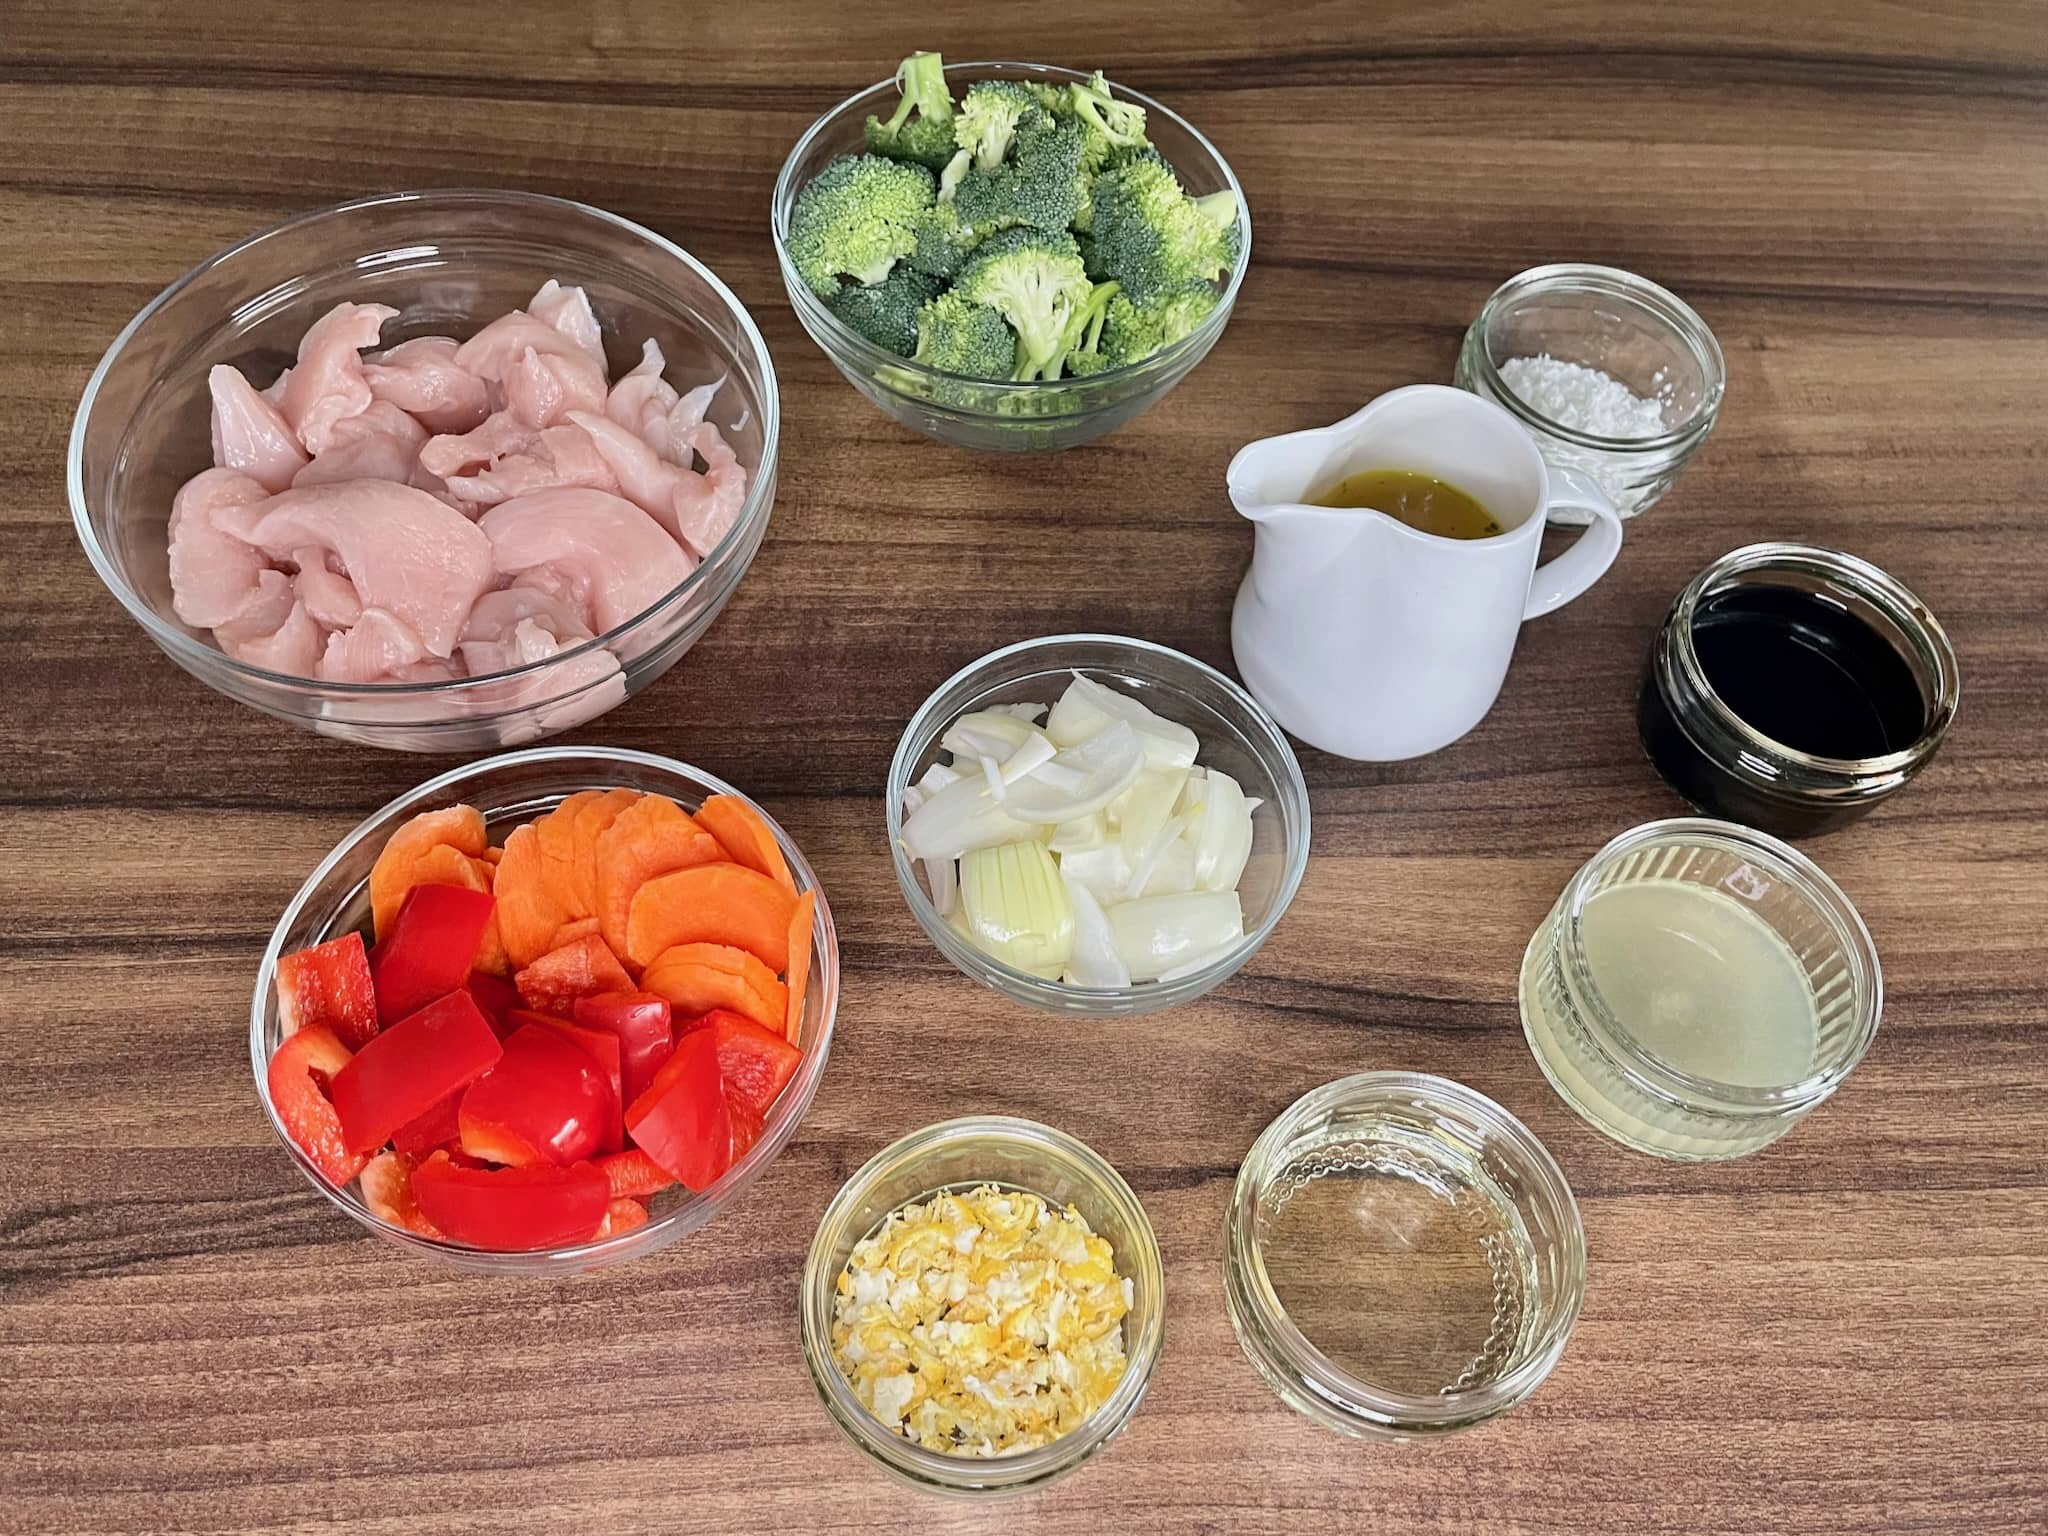 All the ingredients on the table top ready to make stir-Fry Lemon Chicken